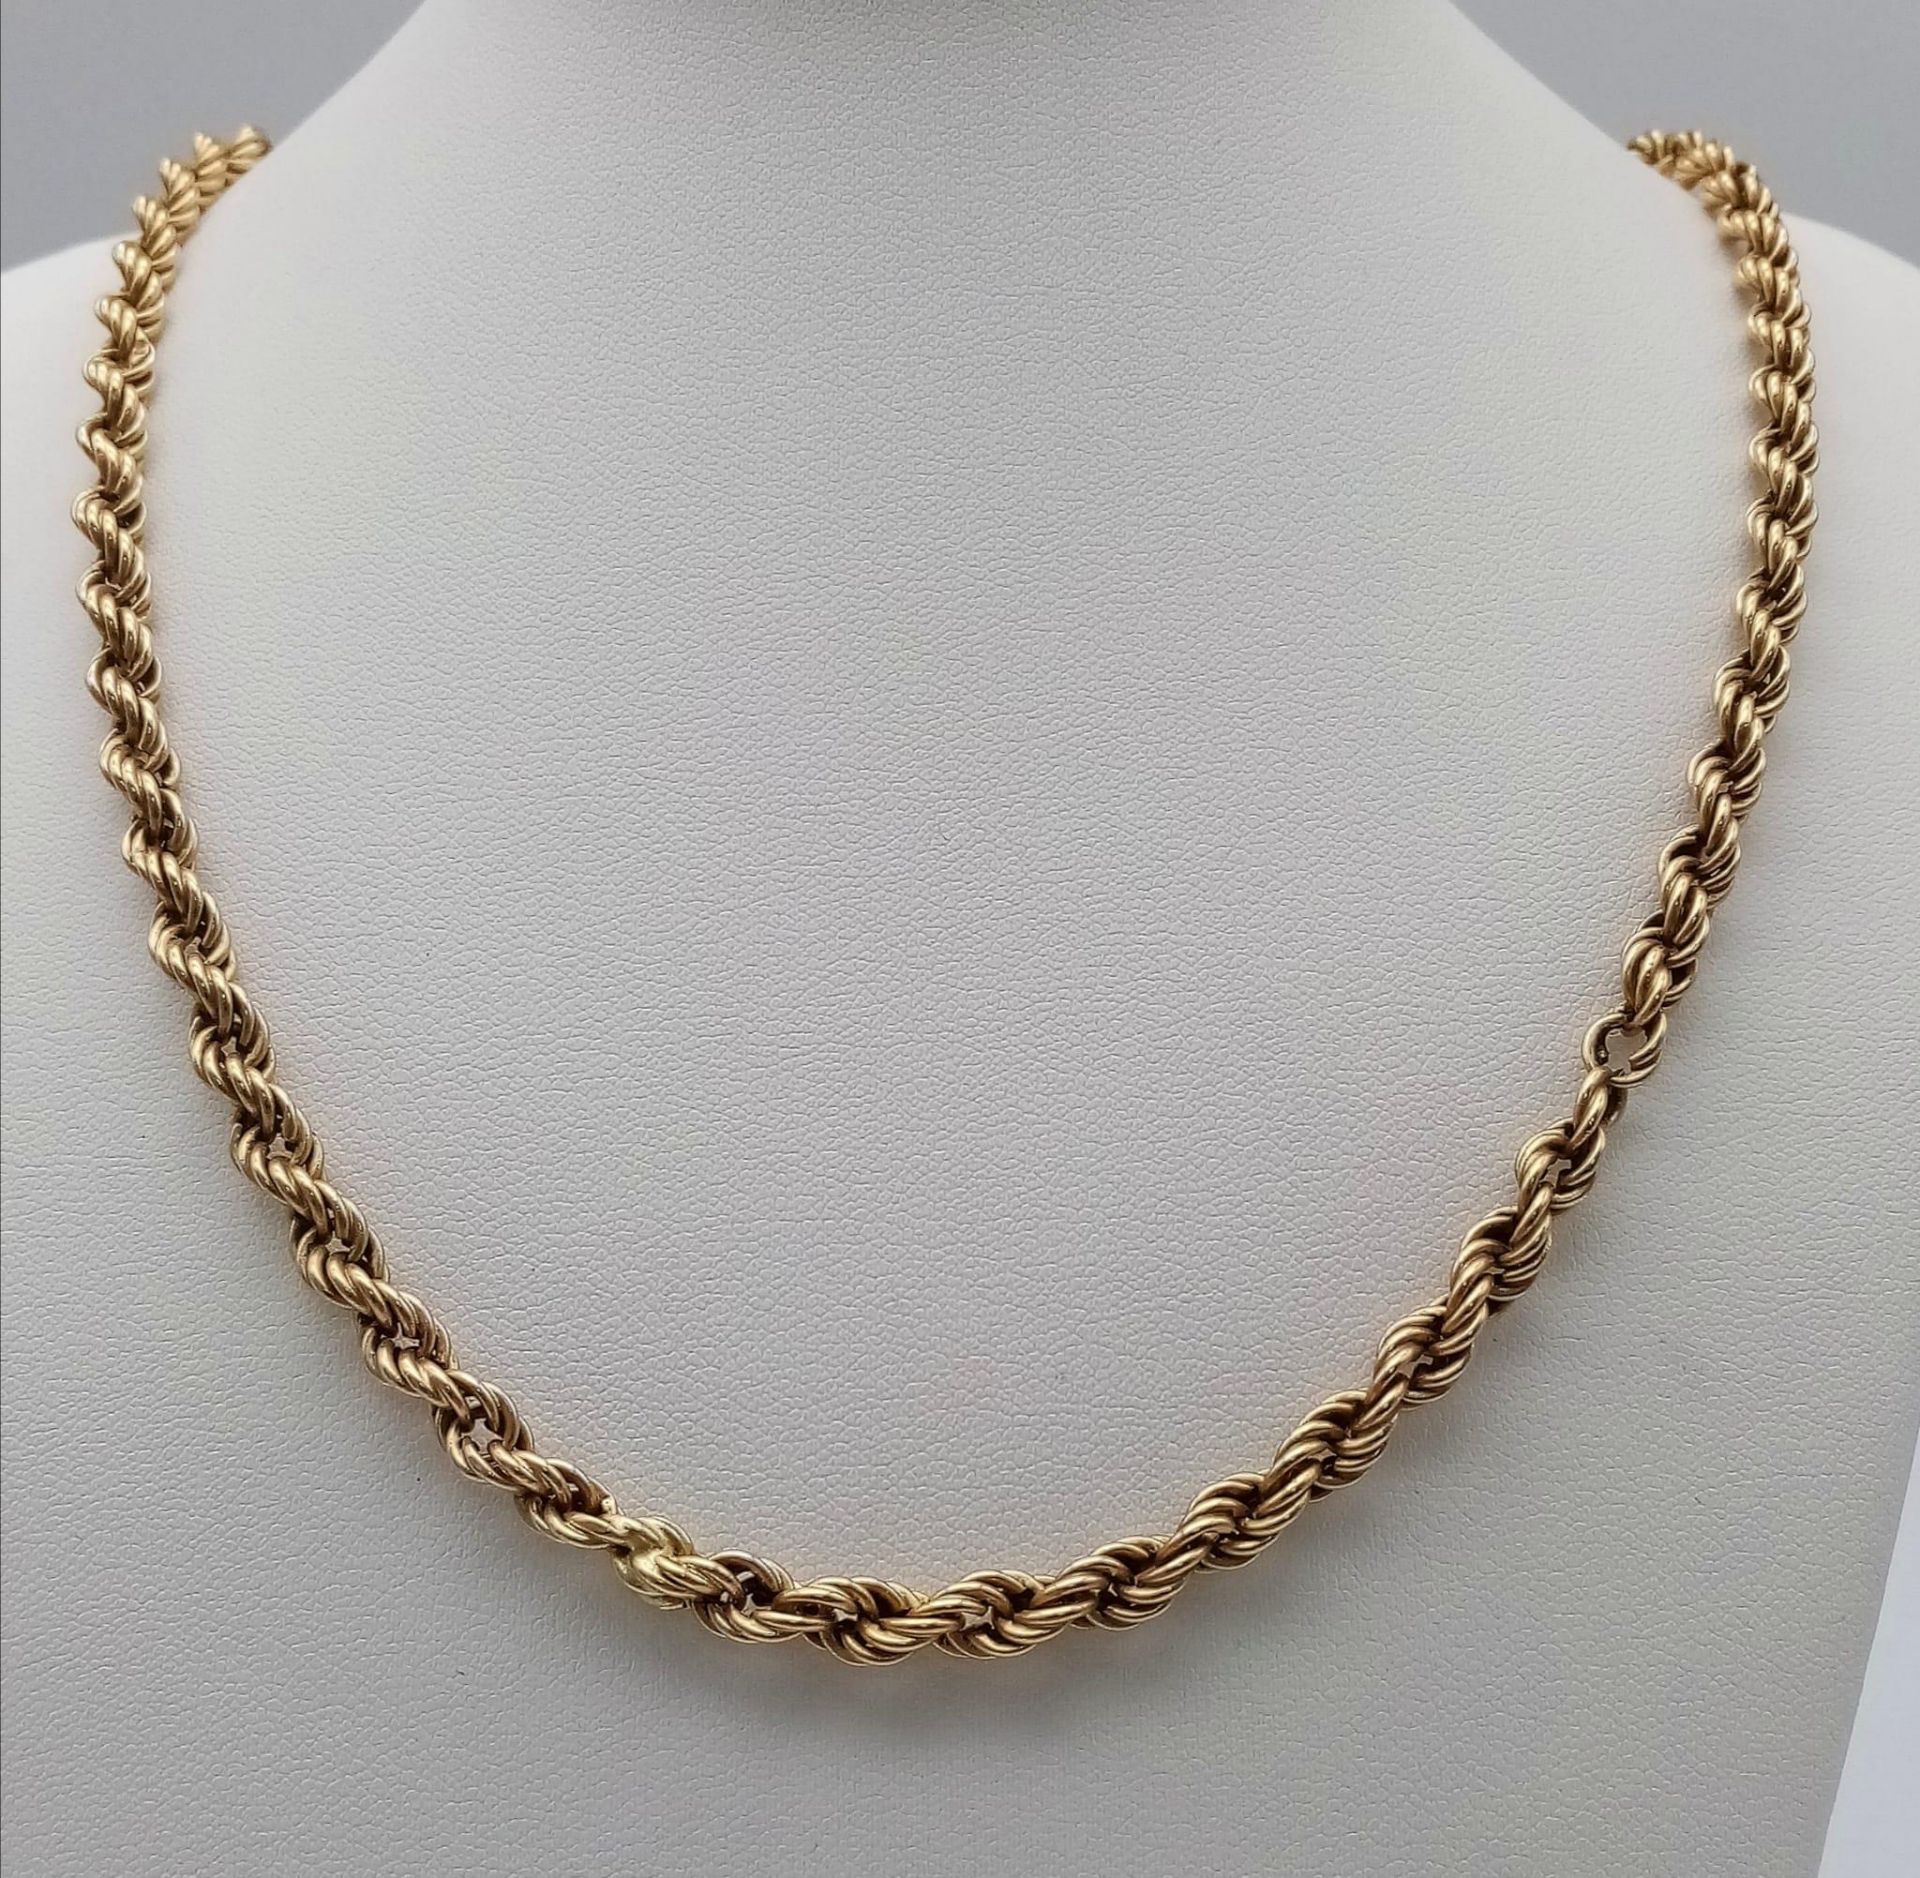 A Vintage 9K Yellow Gold Rope Necklace. 54cm. 11g weight.